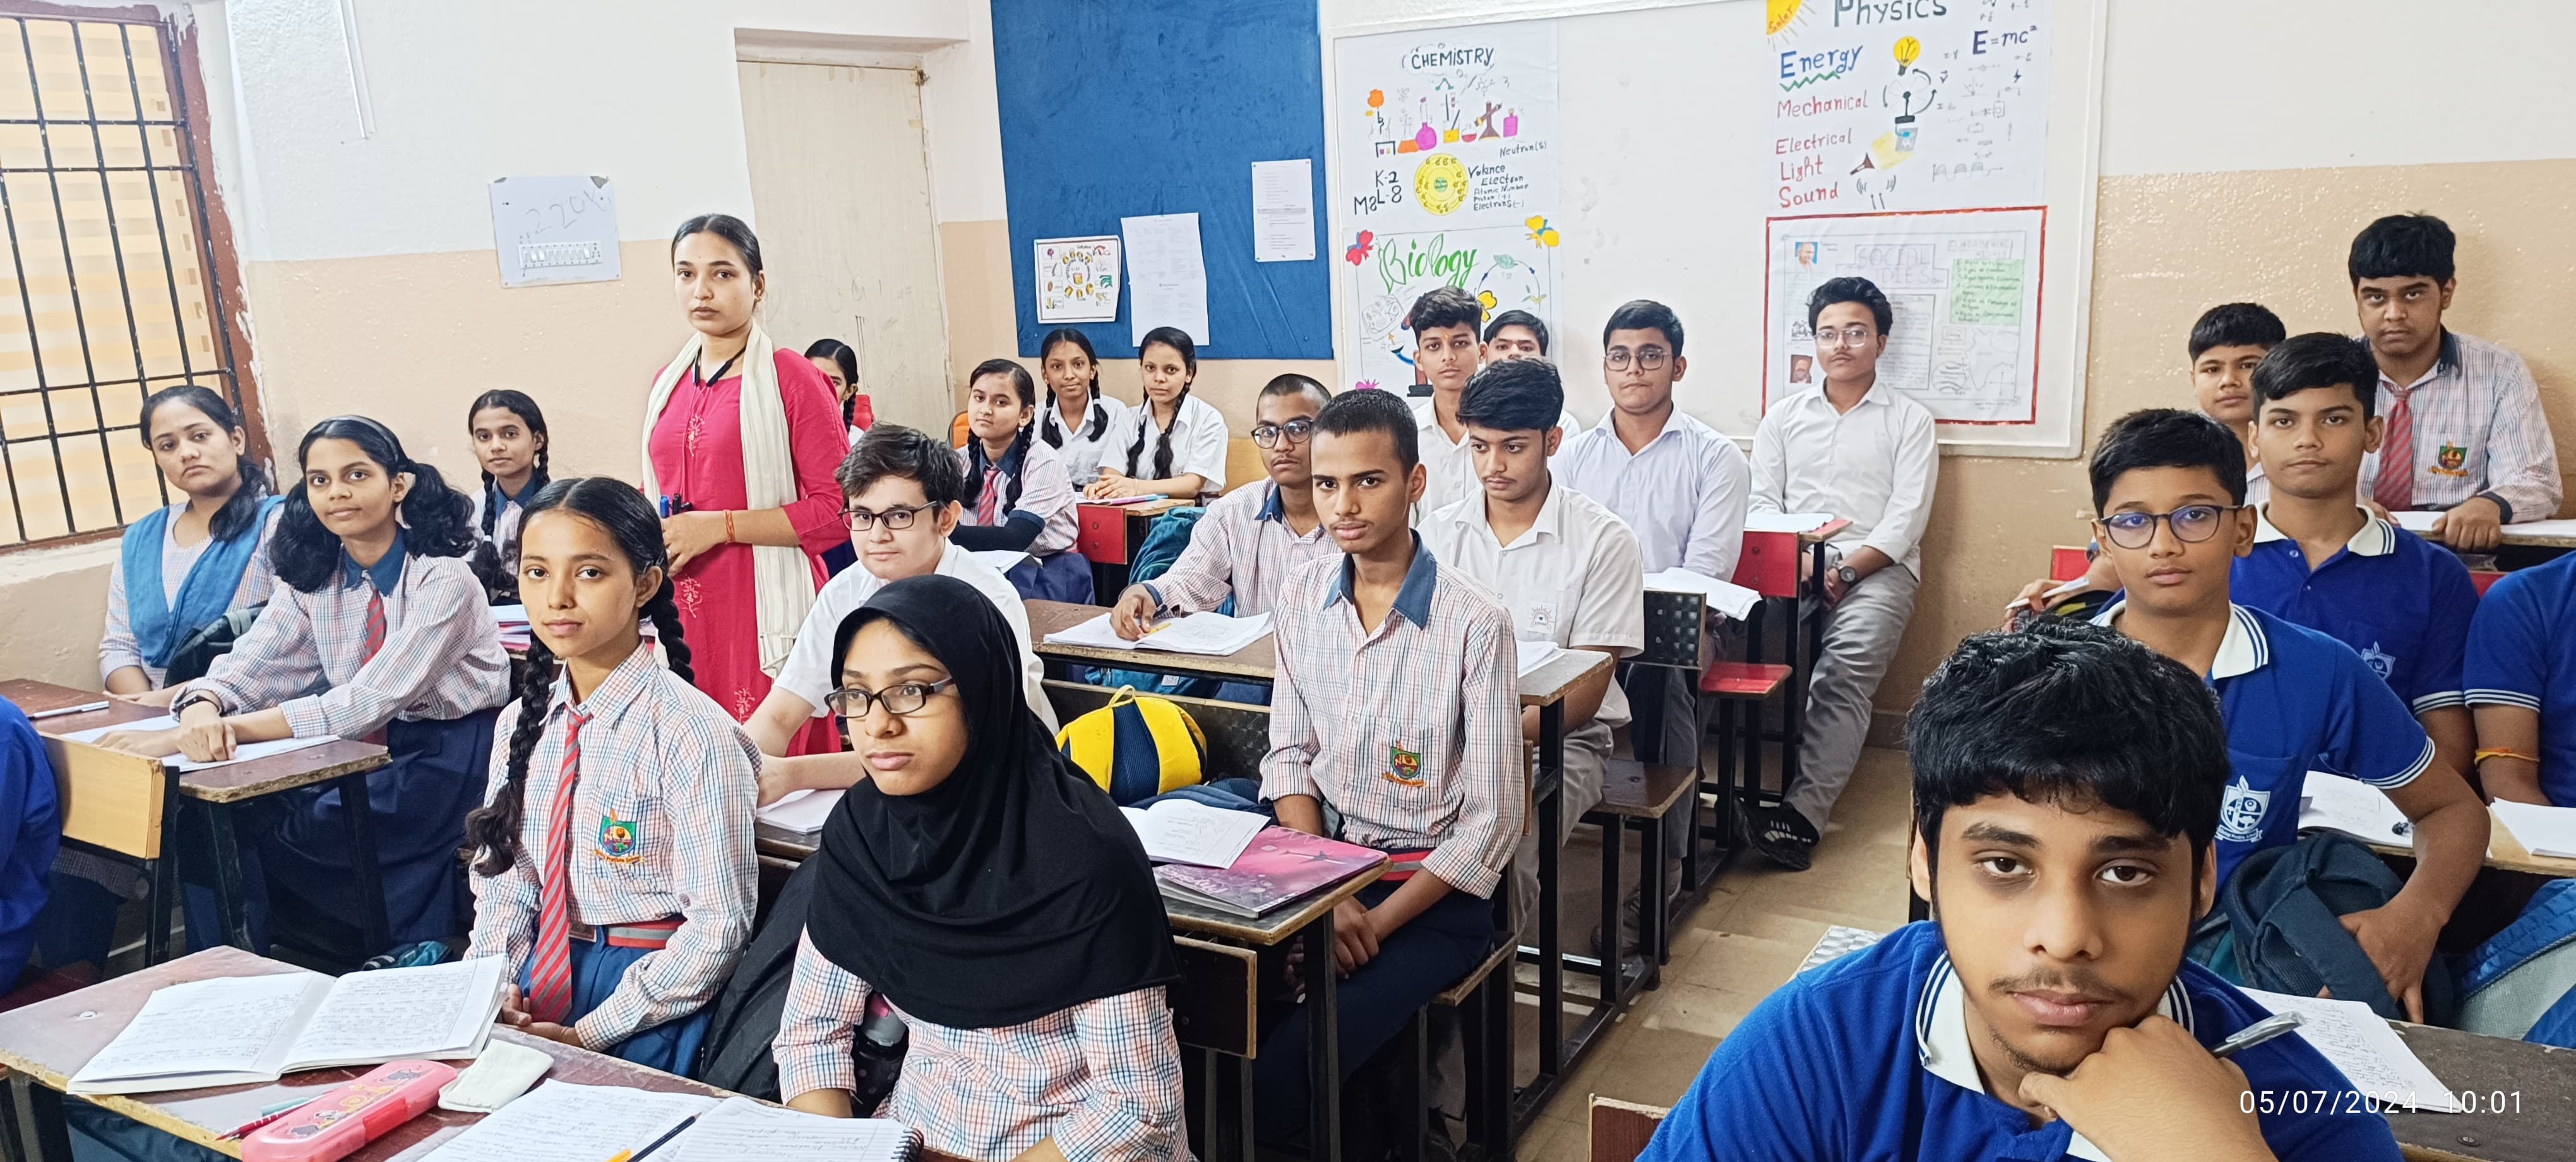 GPS Patna School - Fostering a Love for Learning Through Classroom Teaching